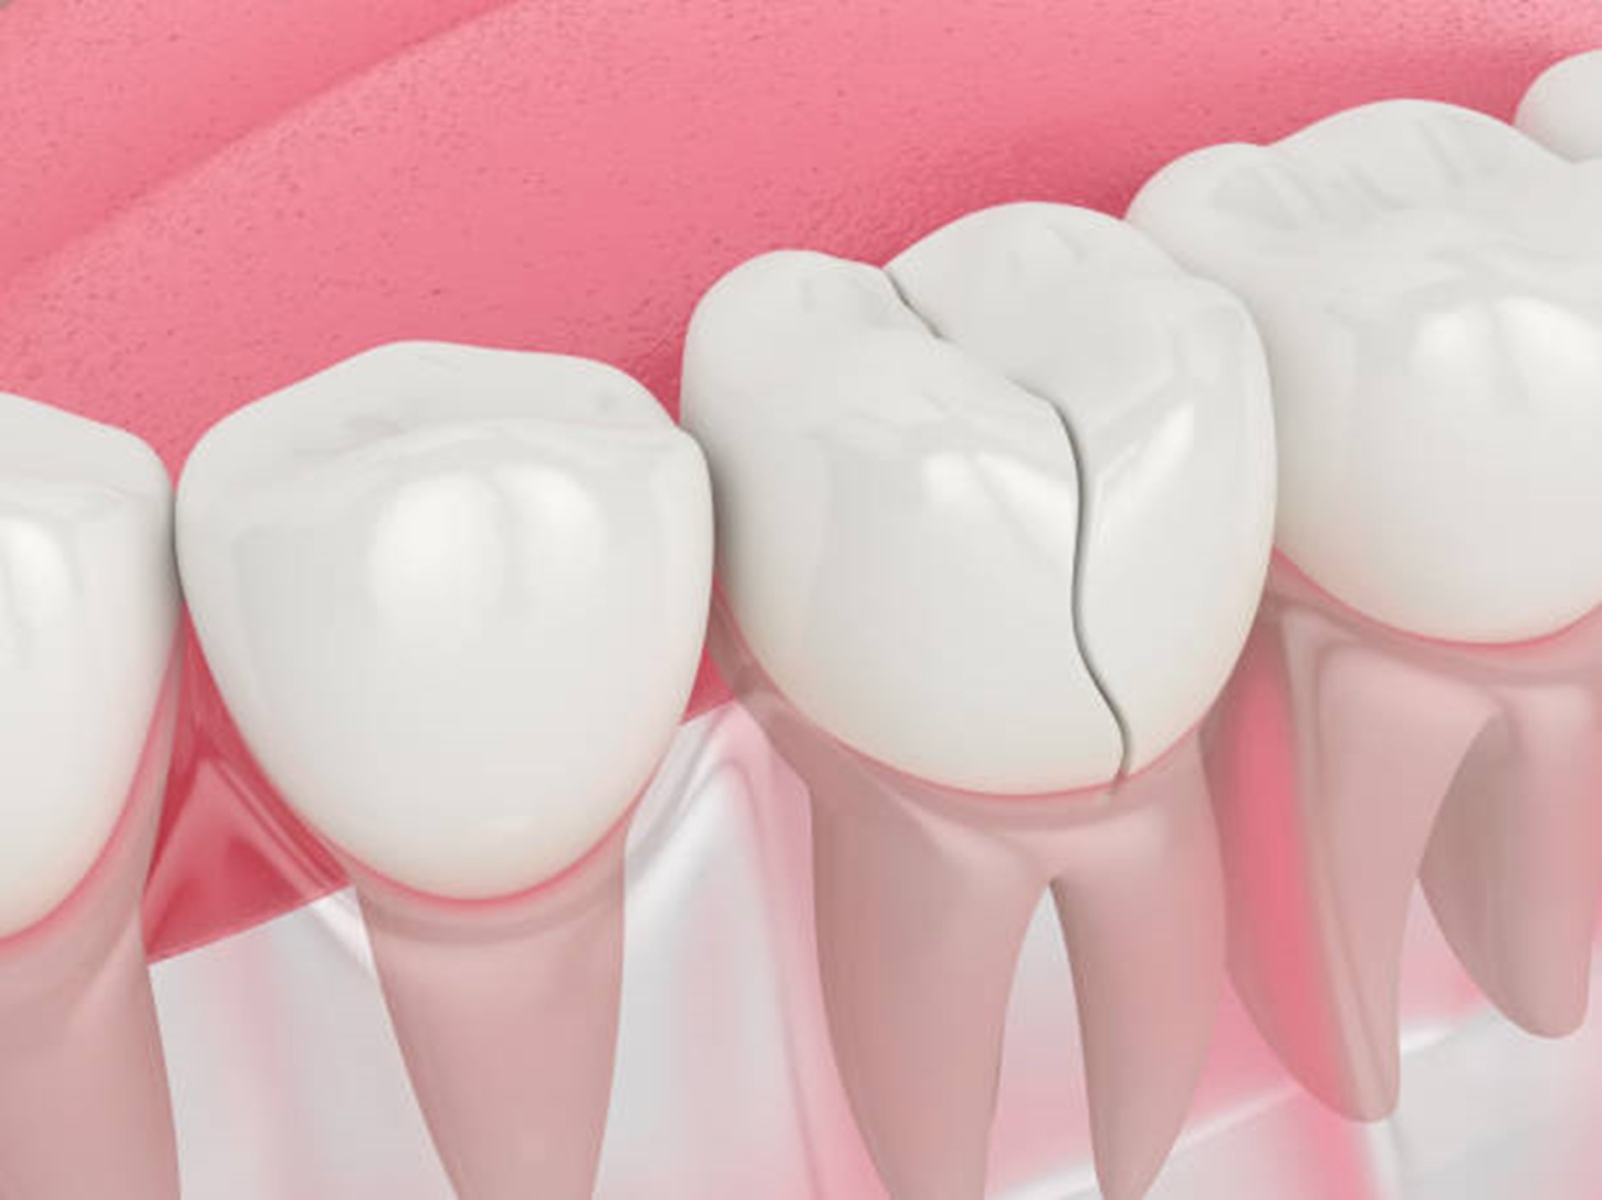 Cracked Tooth Solutions: Exploring Composite Bonding, Veneers, and Crowns at Dental Concepts